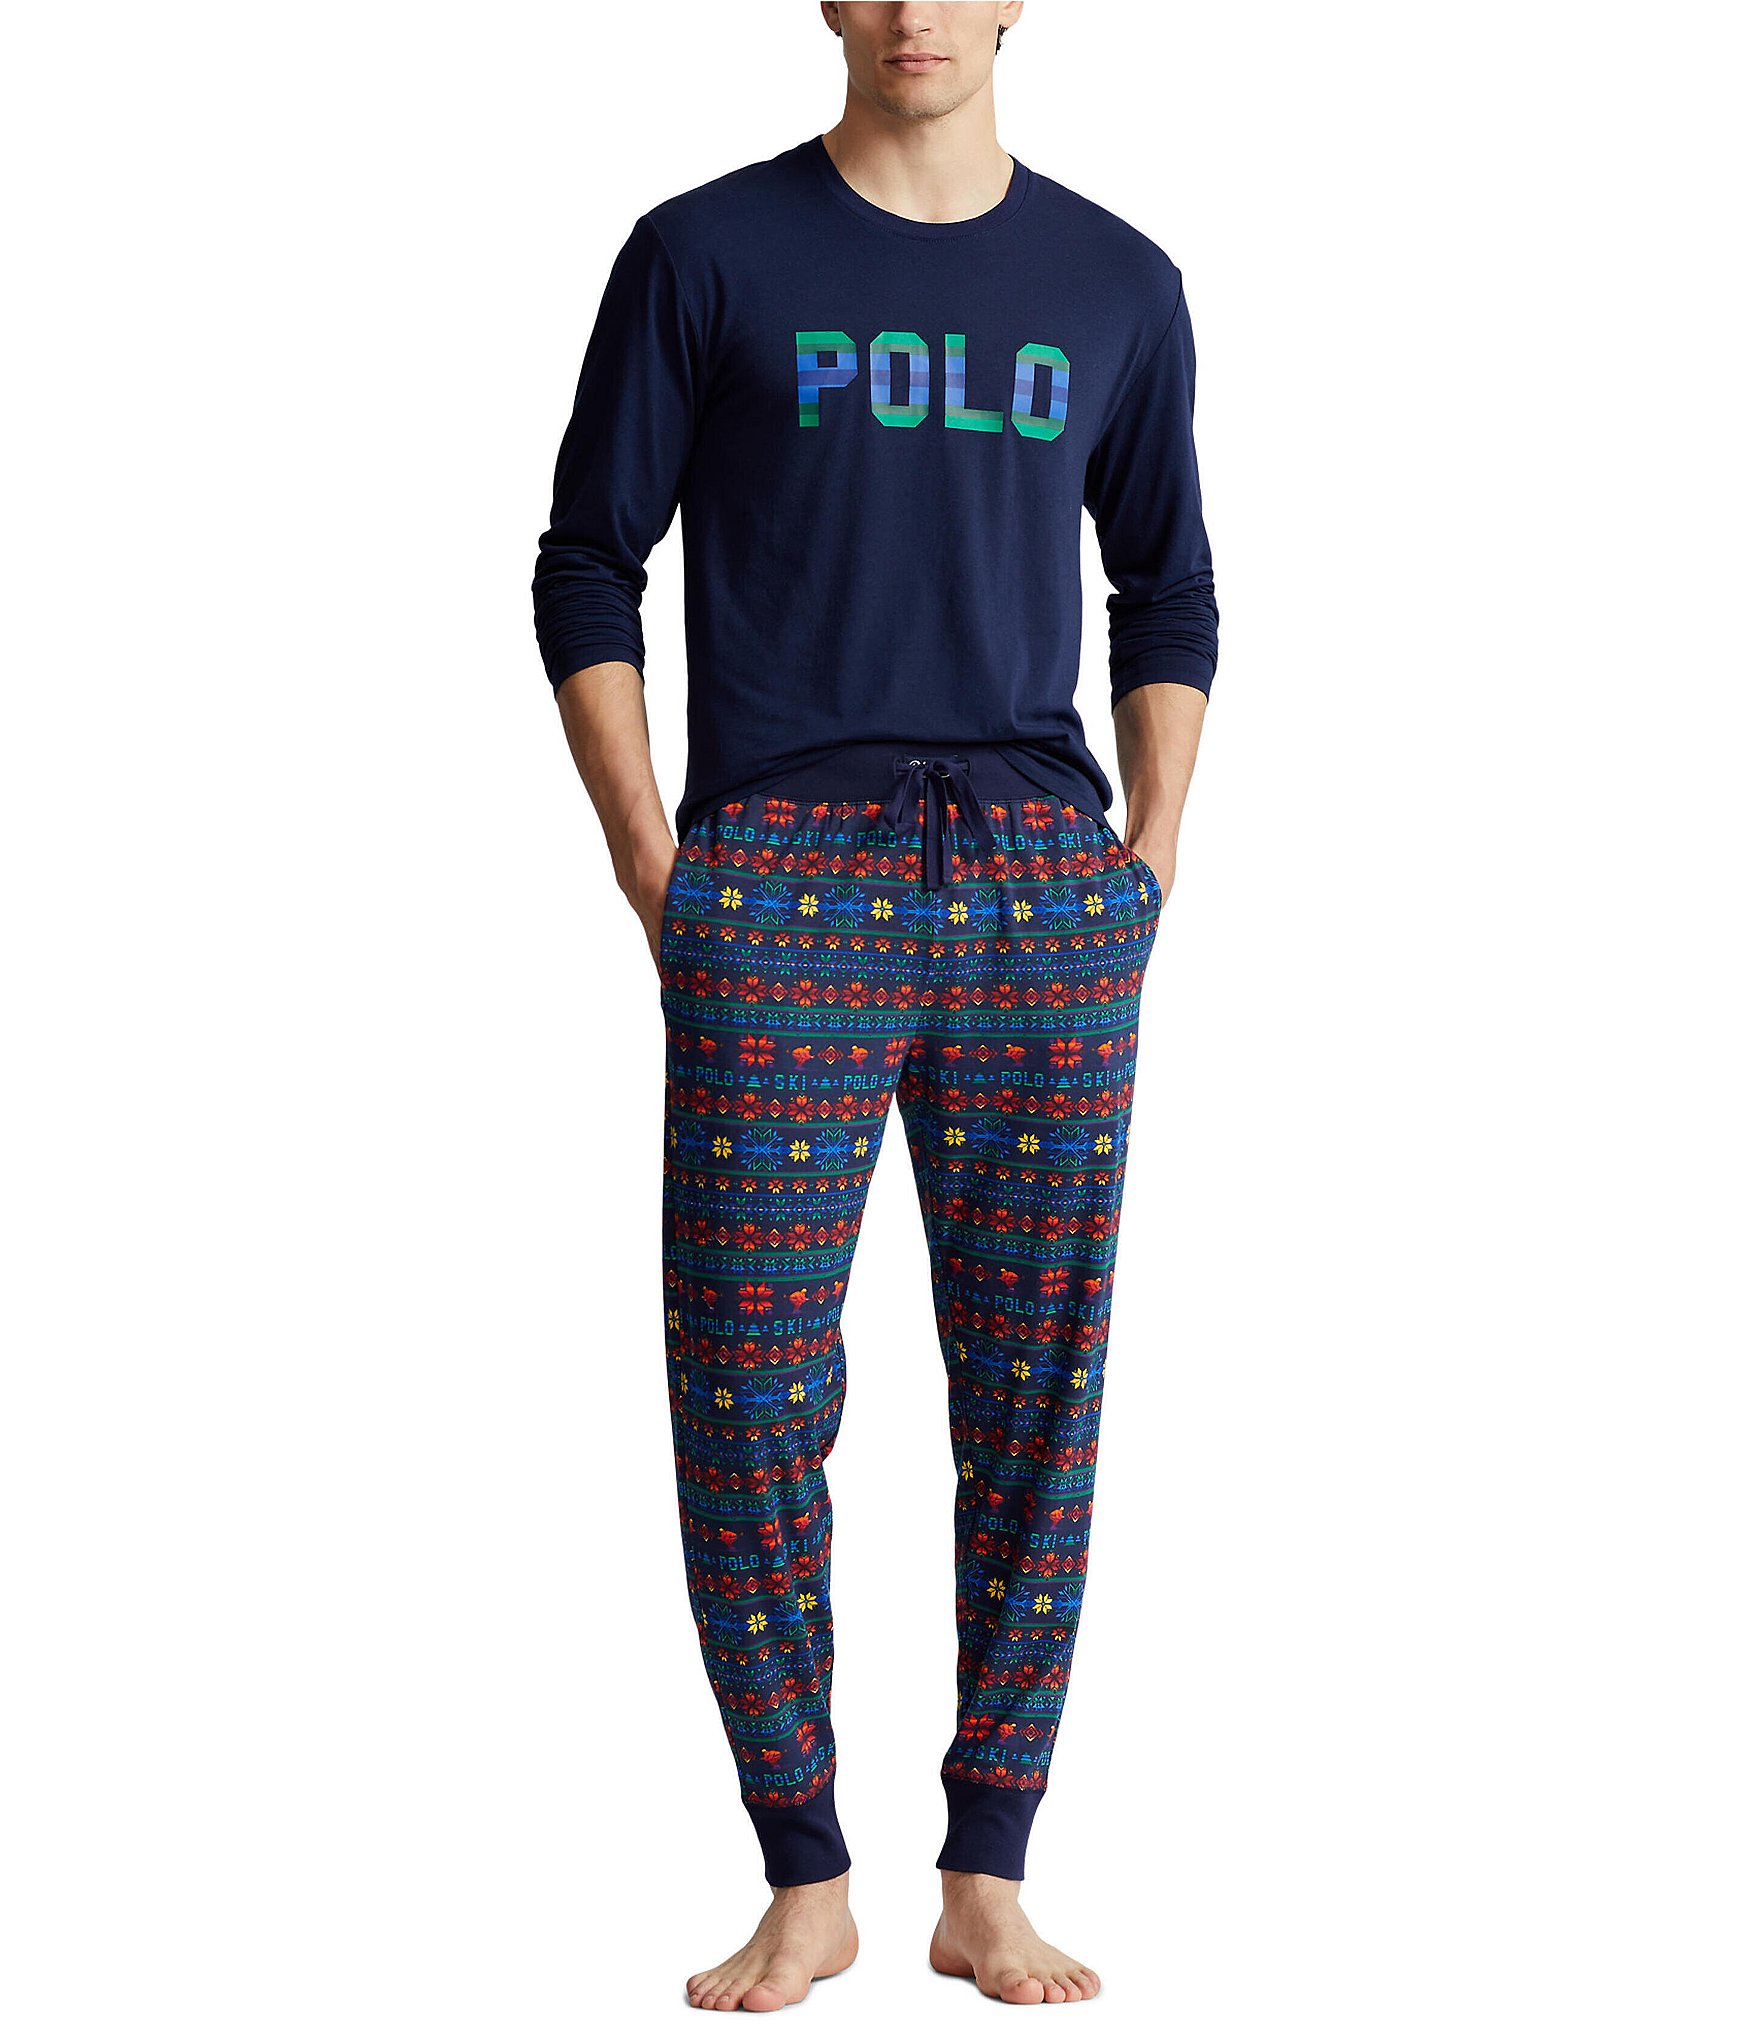 POLO RALPH LAUREN Woven Polo Player Lounge Pants S, Black/Red Pony at   Men's Clothing store: Pajama Bottoms